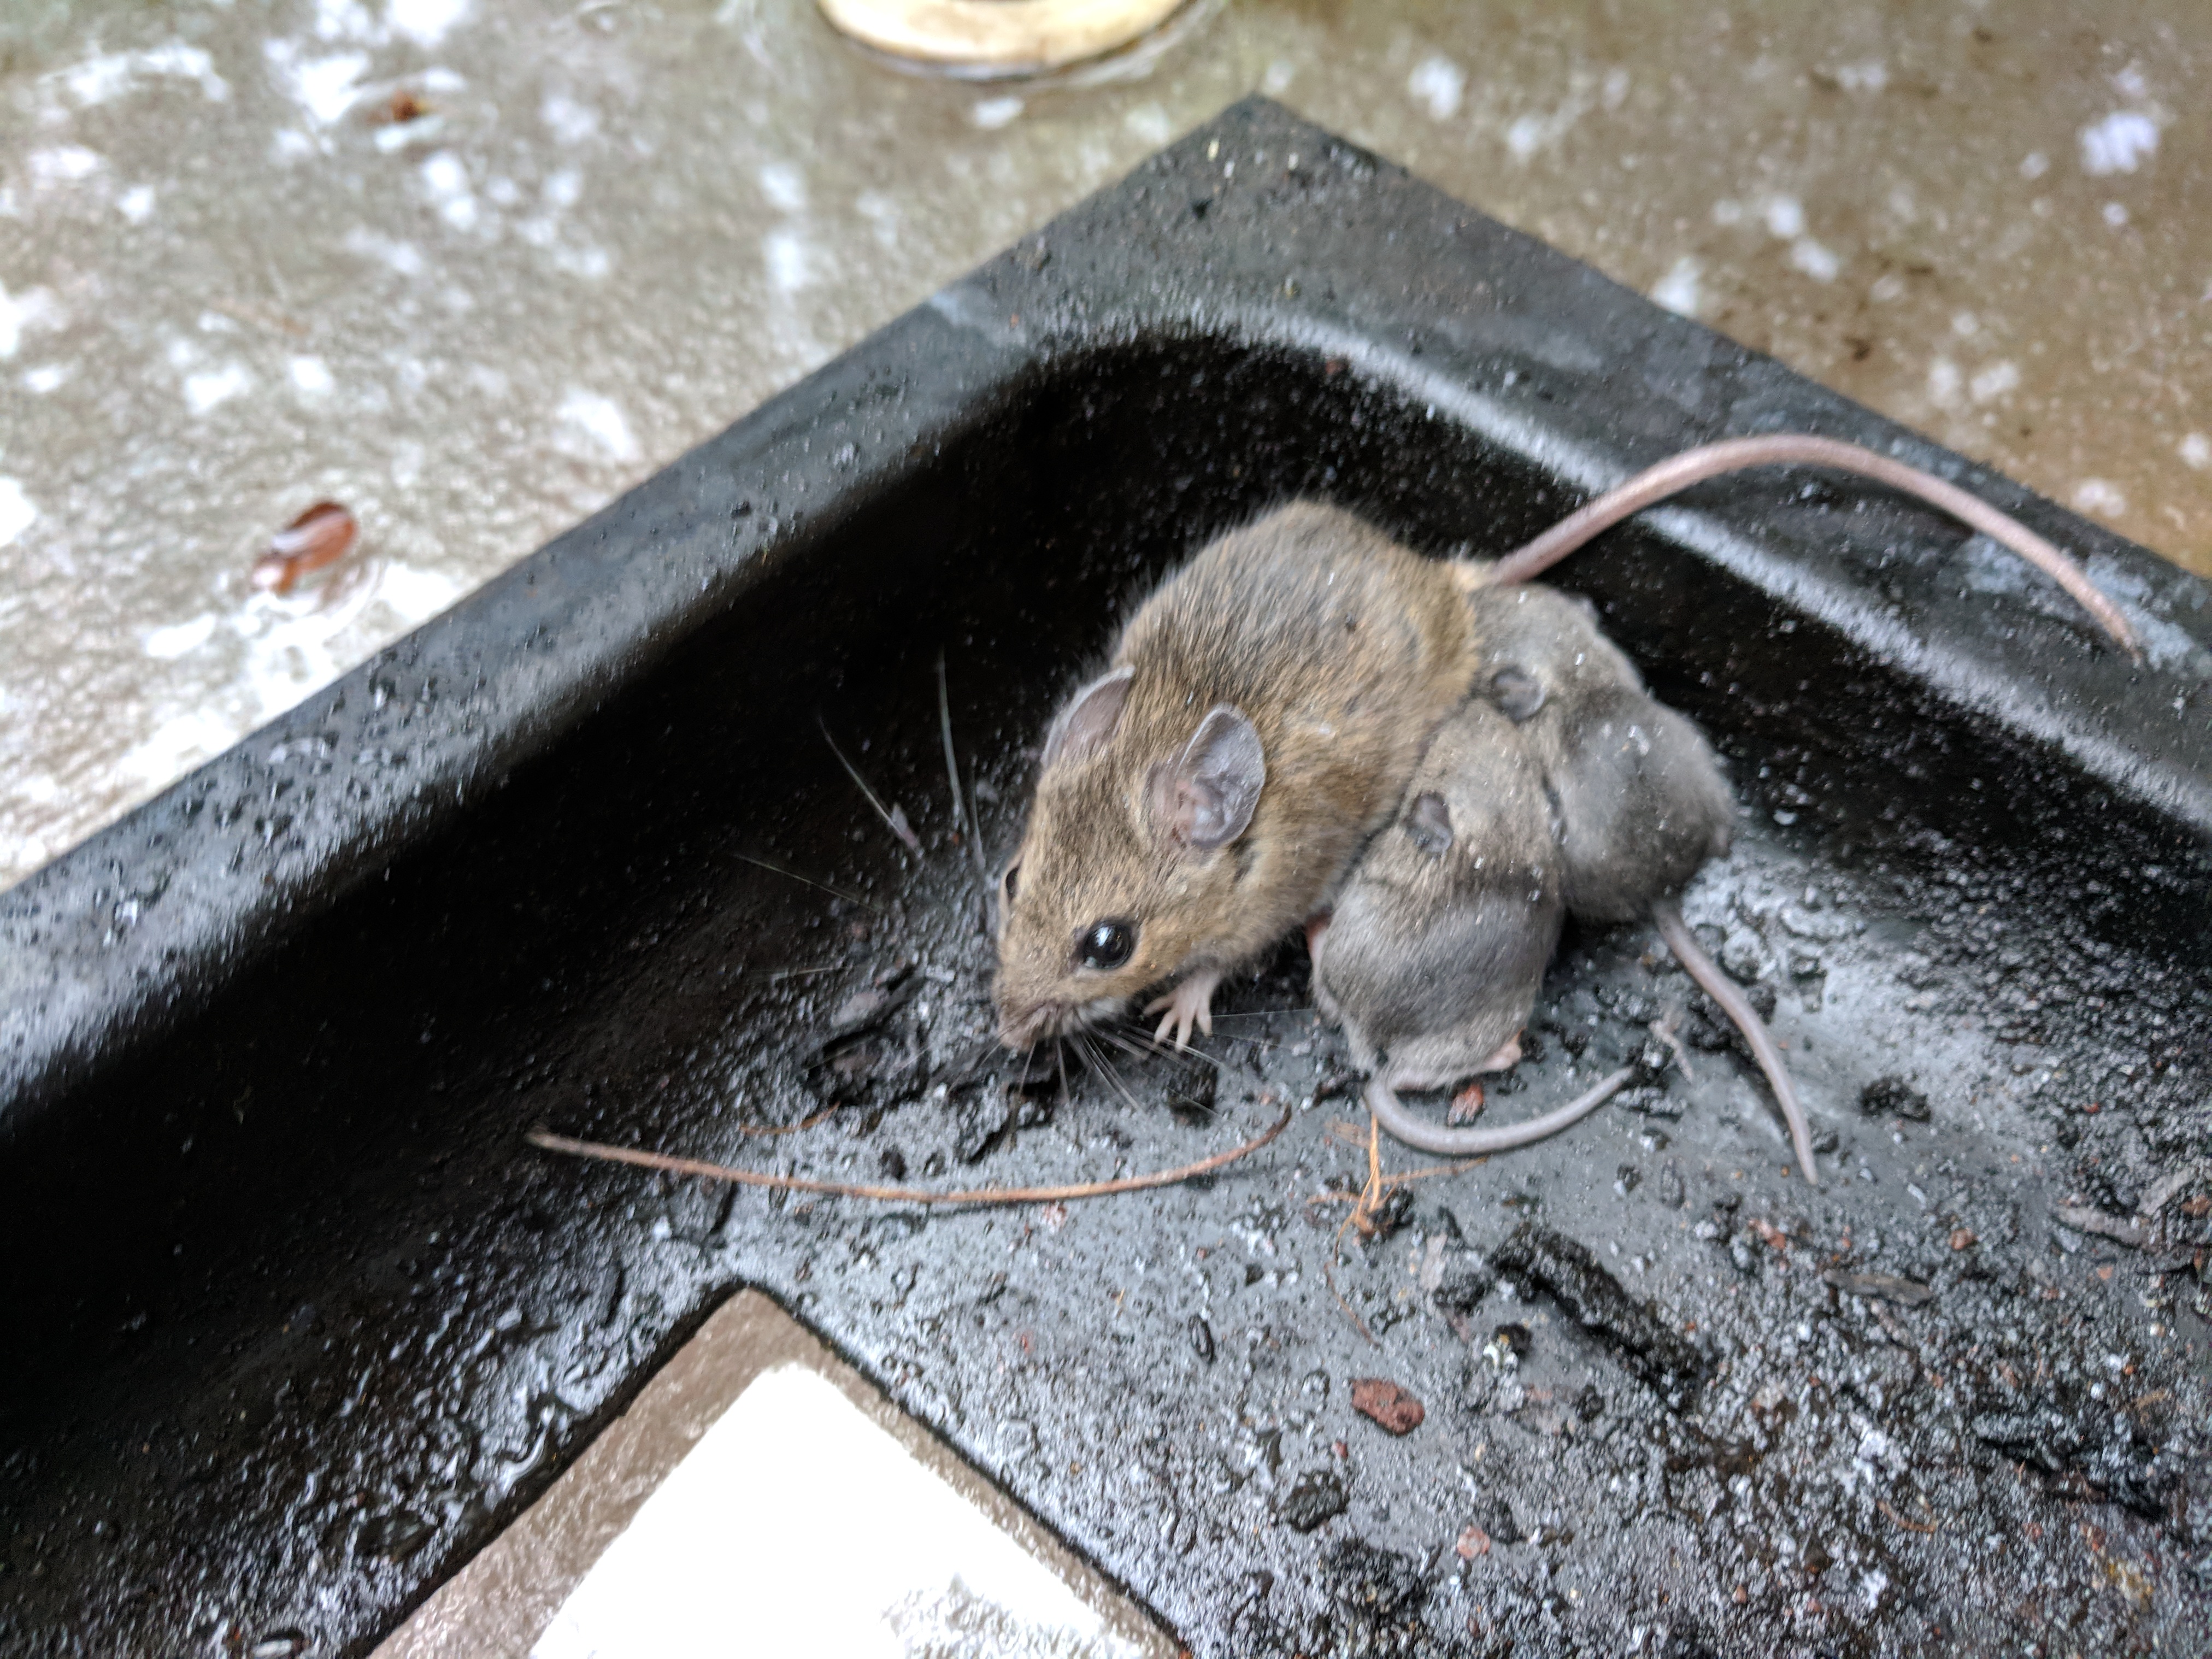 Mouse and fuzzies in my BBQ